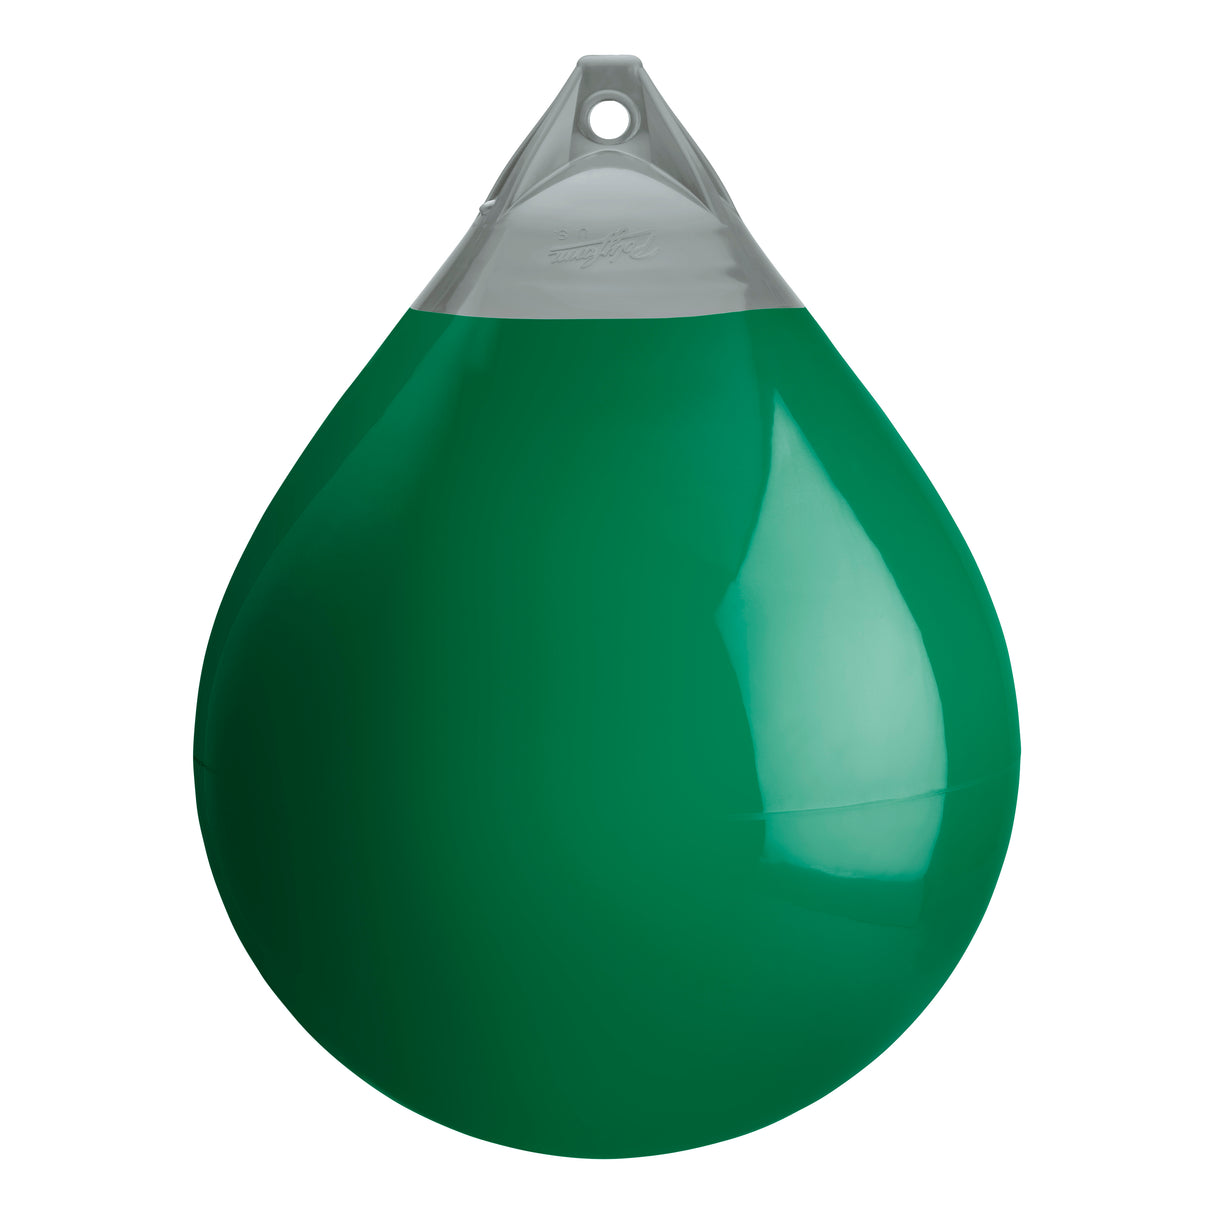 Forest Green buoy with Grey-Top, Polyform A-6